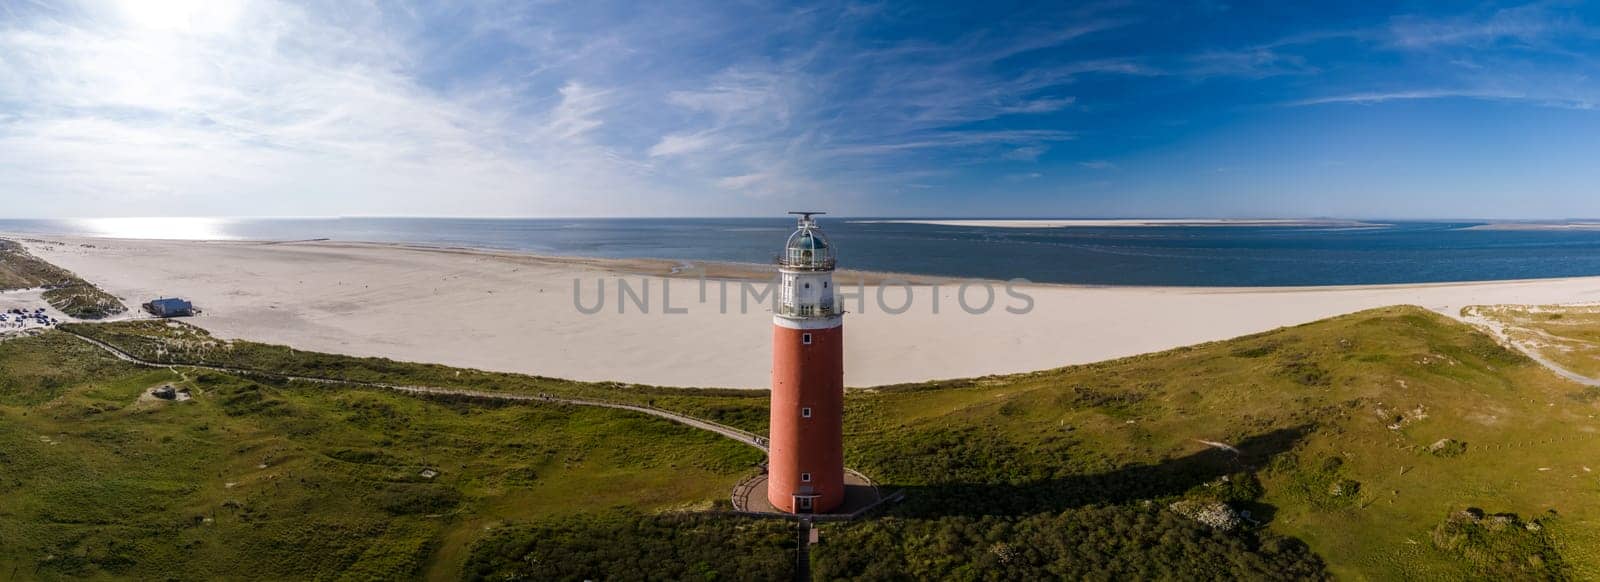 A birds eye view of a tall lighthouse with a beacon shining brightly on a sandy beach, overlooking the vast ocean on the island of Texel, Netherlands.